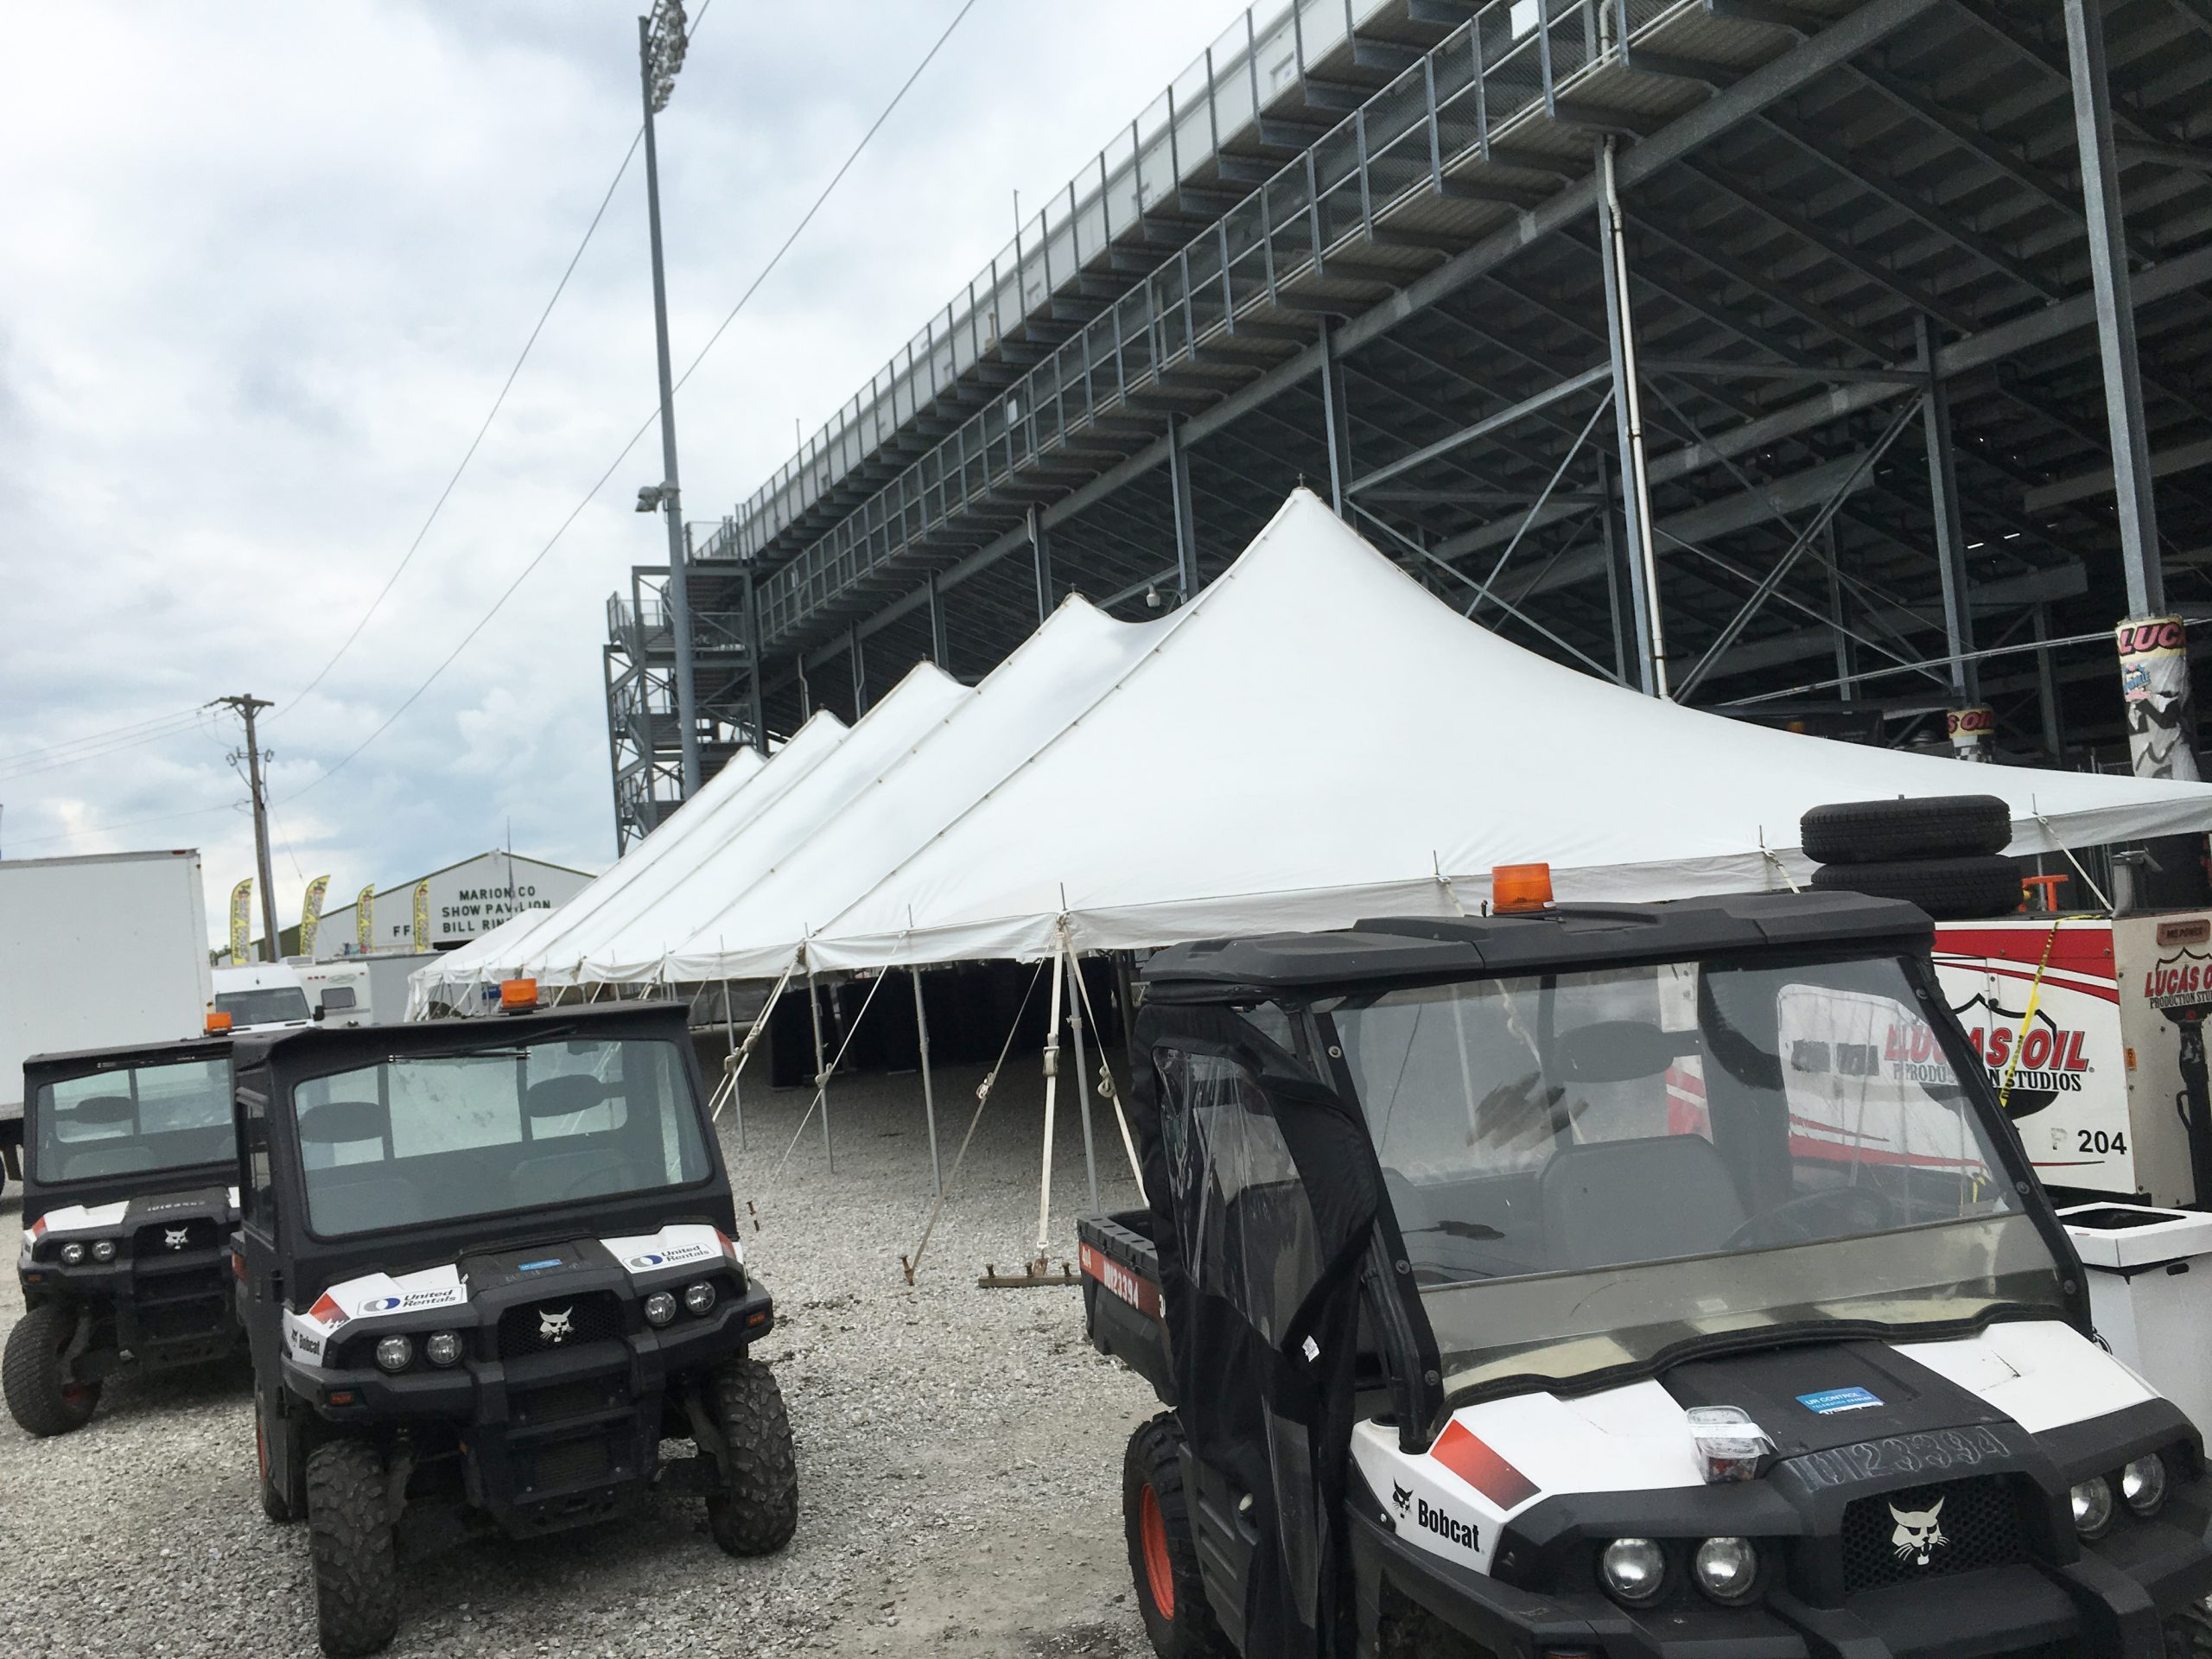 Outside of the 40' x 120' rope and pole tent at Knoxville Raceway (Marion County Fairgrounds) in Iowa